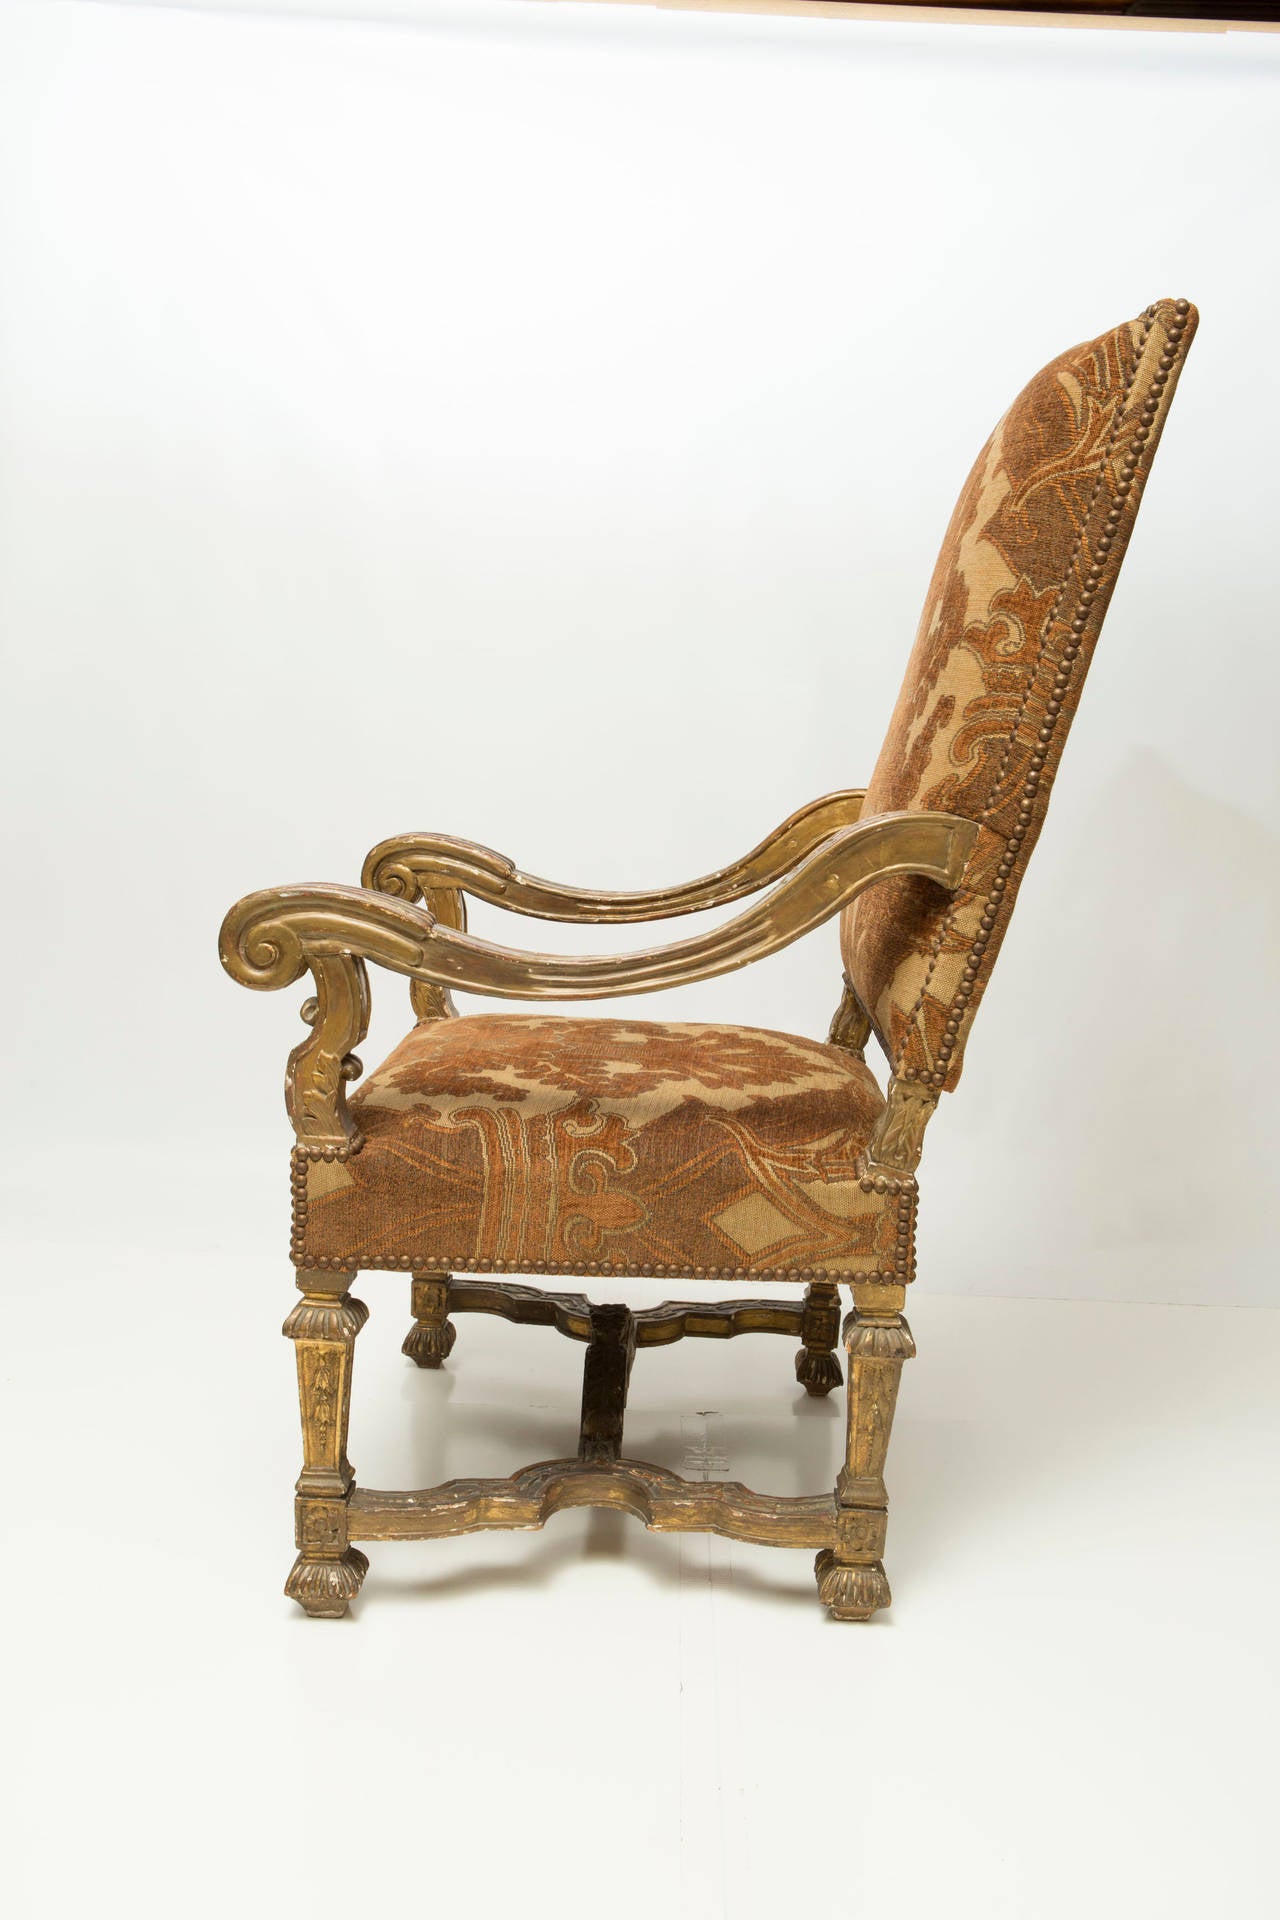 Louis XIV Style Carved Giltwood Armchair, 19th century with nail head trim.